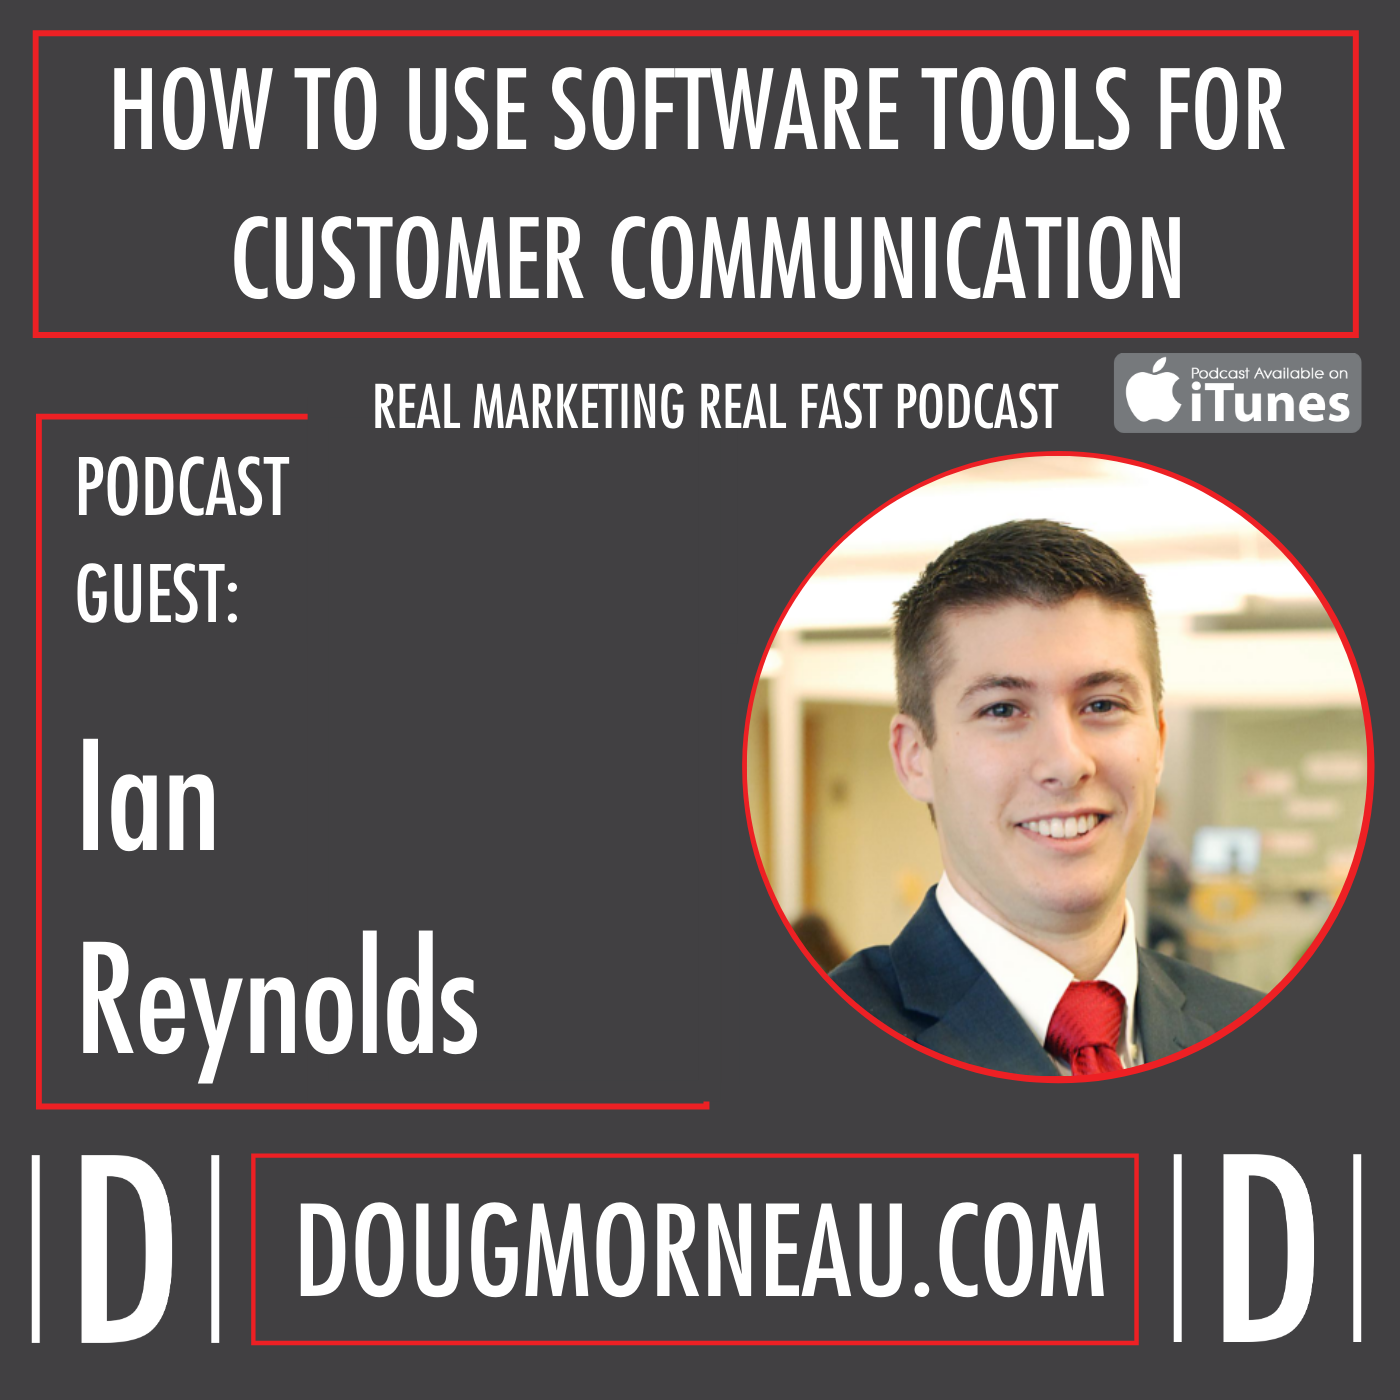 IAN REYNOLDS - HOW TO USE SOFTWARE TOOLS FOR CUSTOMER COMMUNICATION - DOUG MORNEAU - REAL MARKETING REAL FAST PODCAST